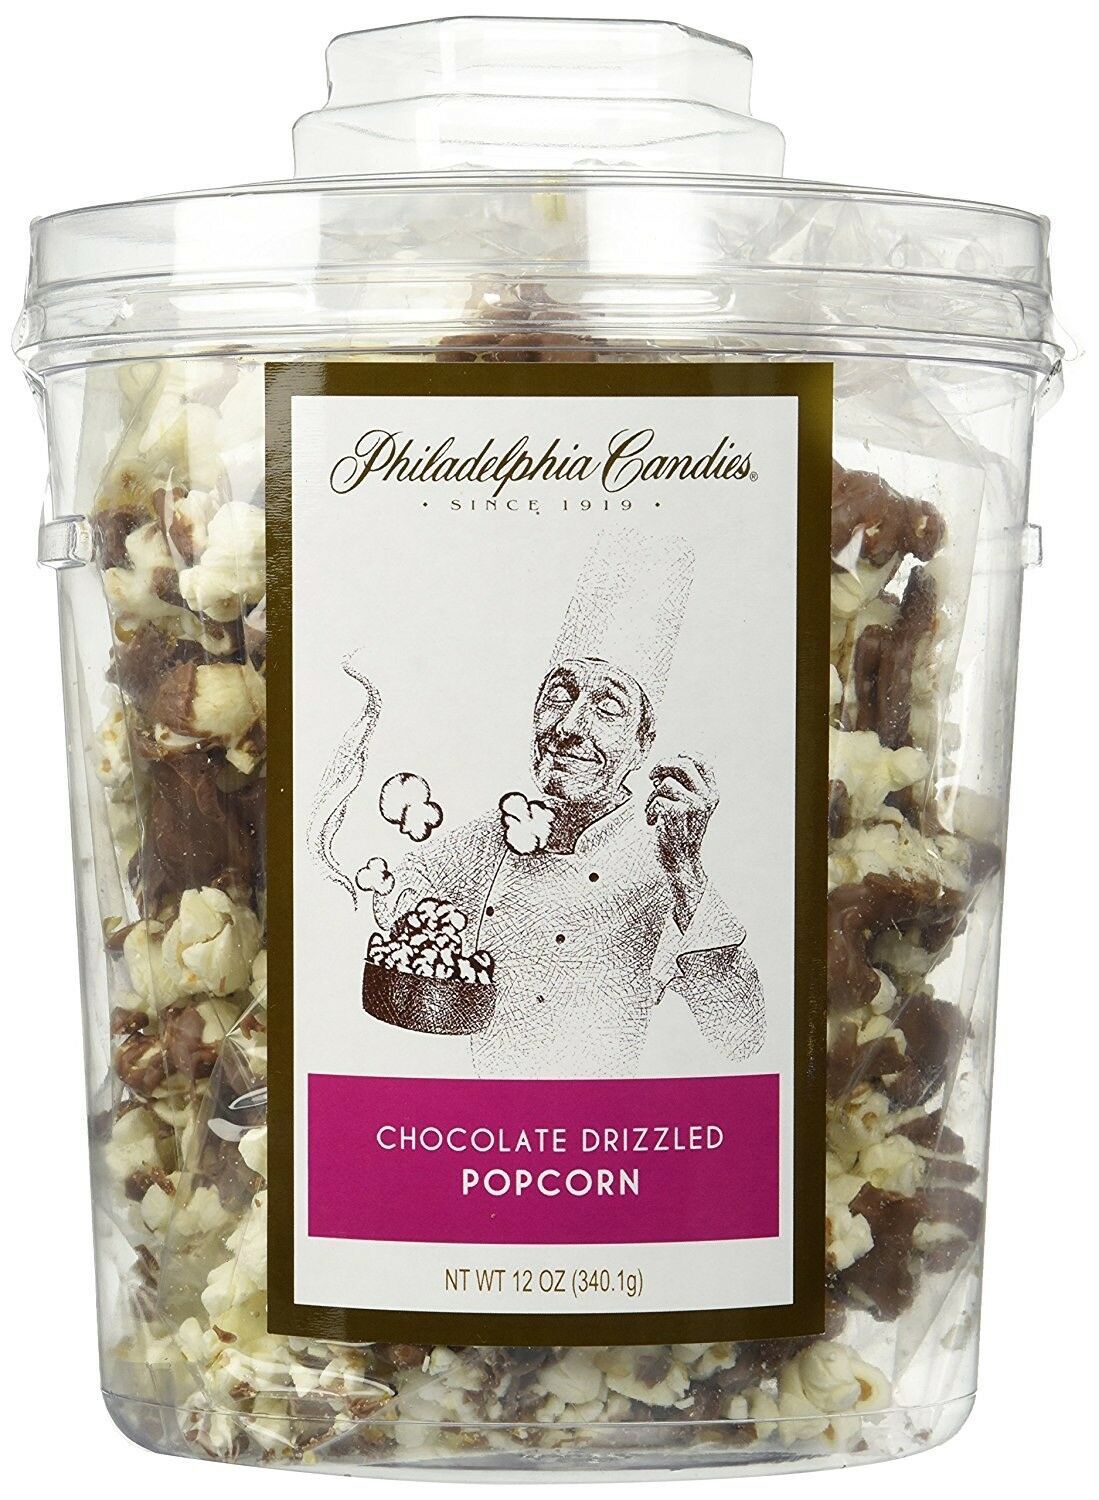 Philadelphia Candies Milk Chocolate Covered Drizzled Popcorn Gift Tub 12 Ounce